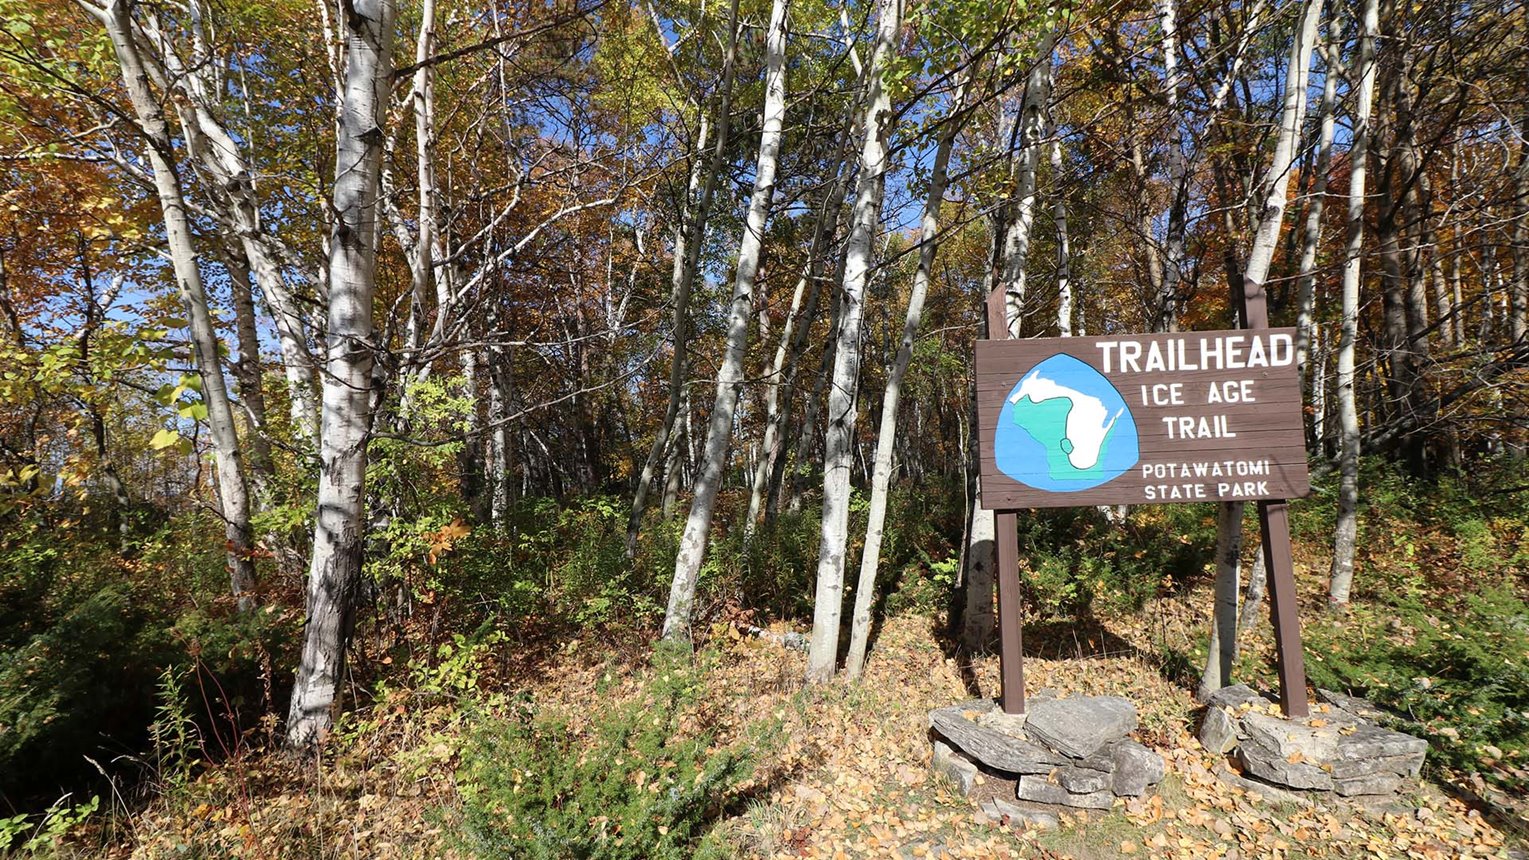 Ice Age trailhead in the trees